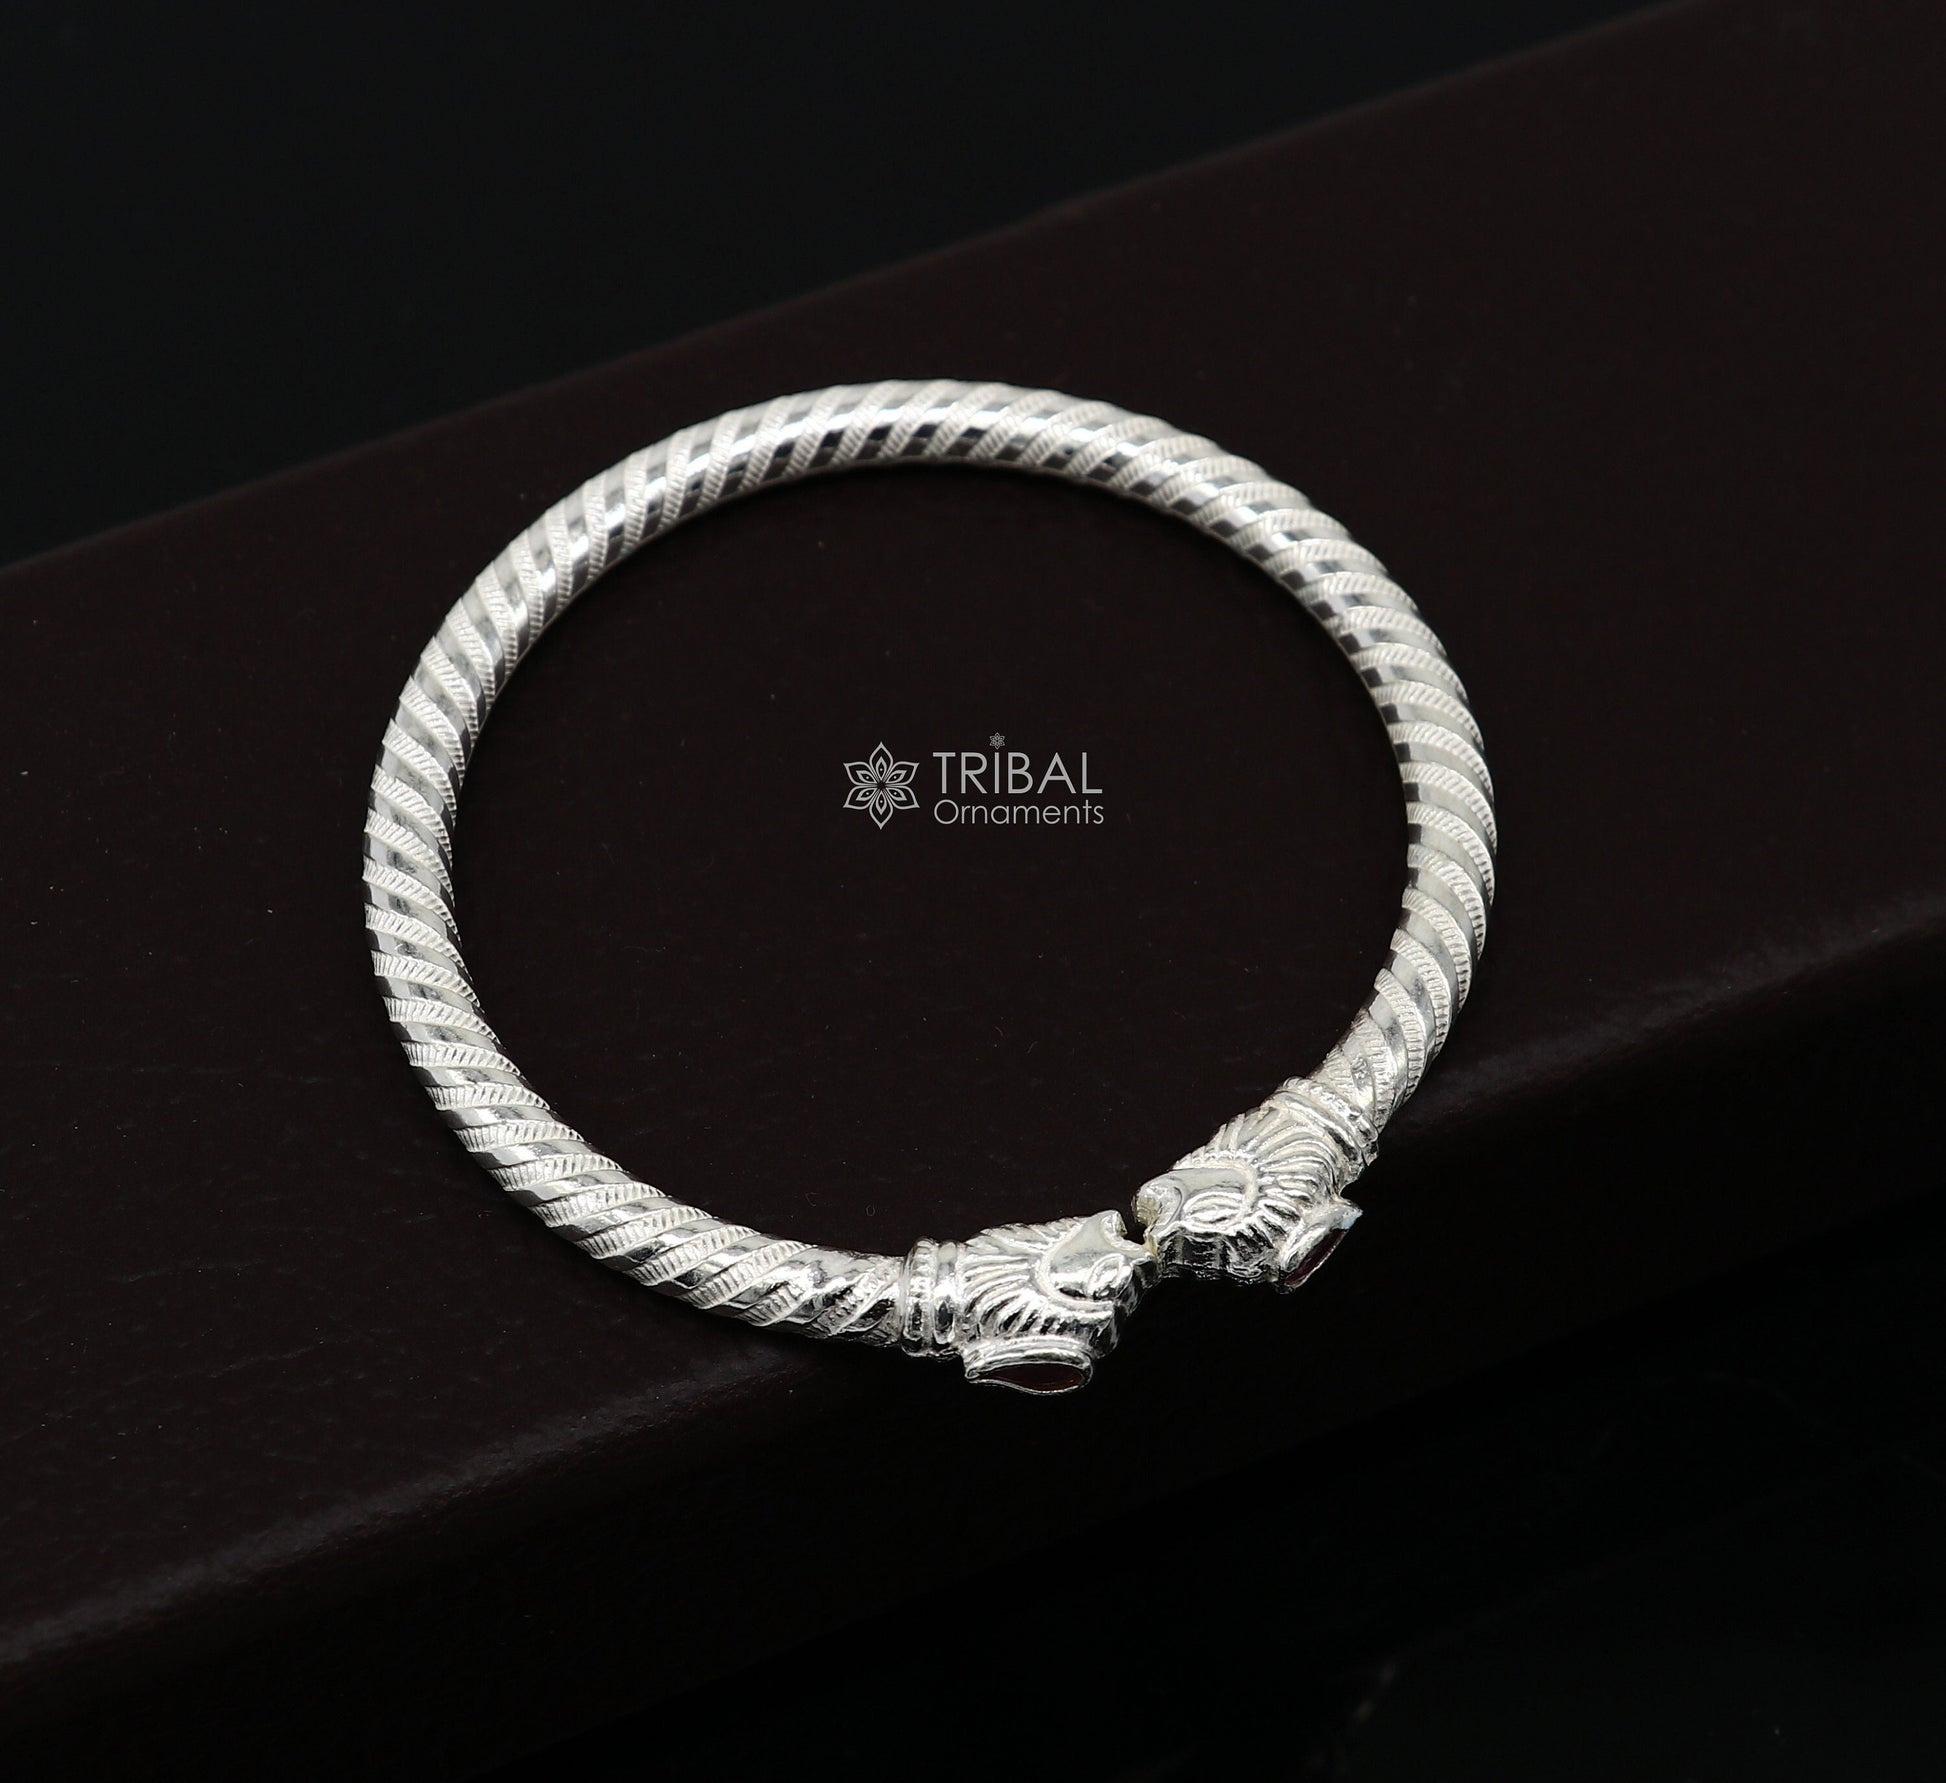 925 sterling silver handmade lion face design cultural trendy kada bracelet for men's and girl's, best delicate Light weight jewelry nsk662 - TRIBAL ORNAMENTS